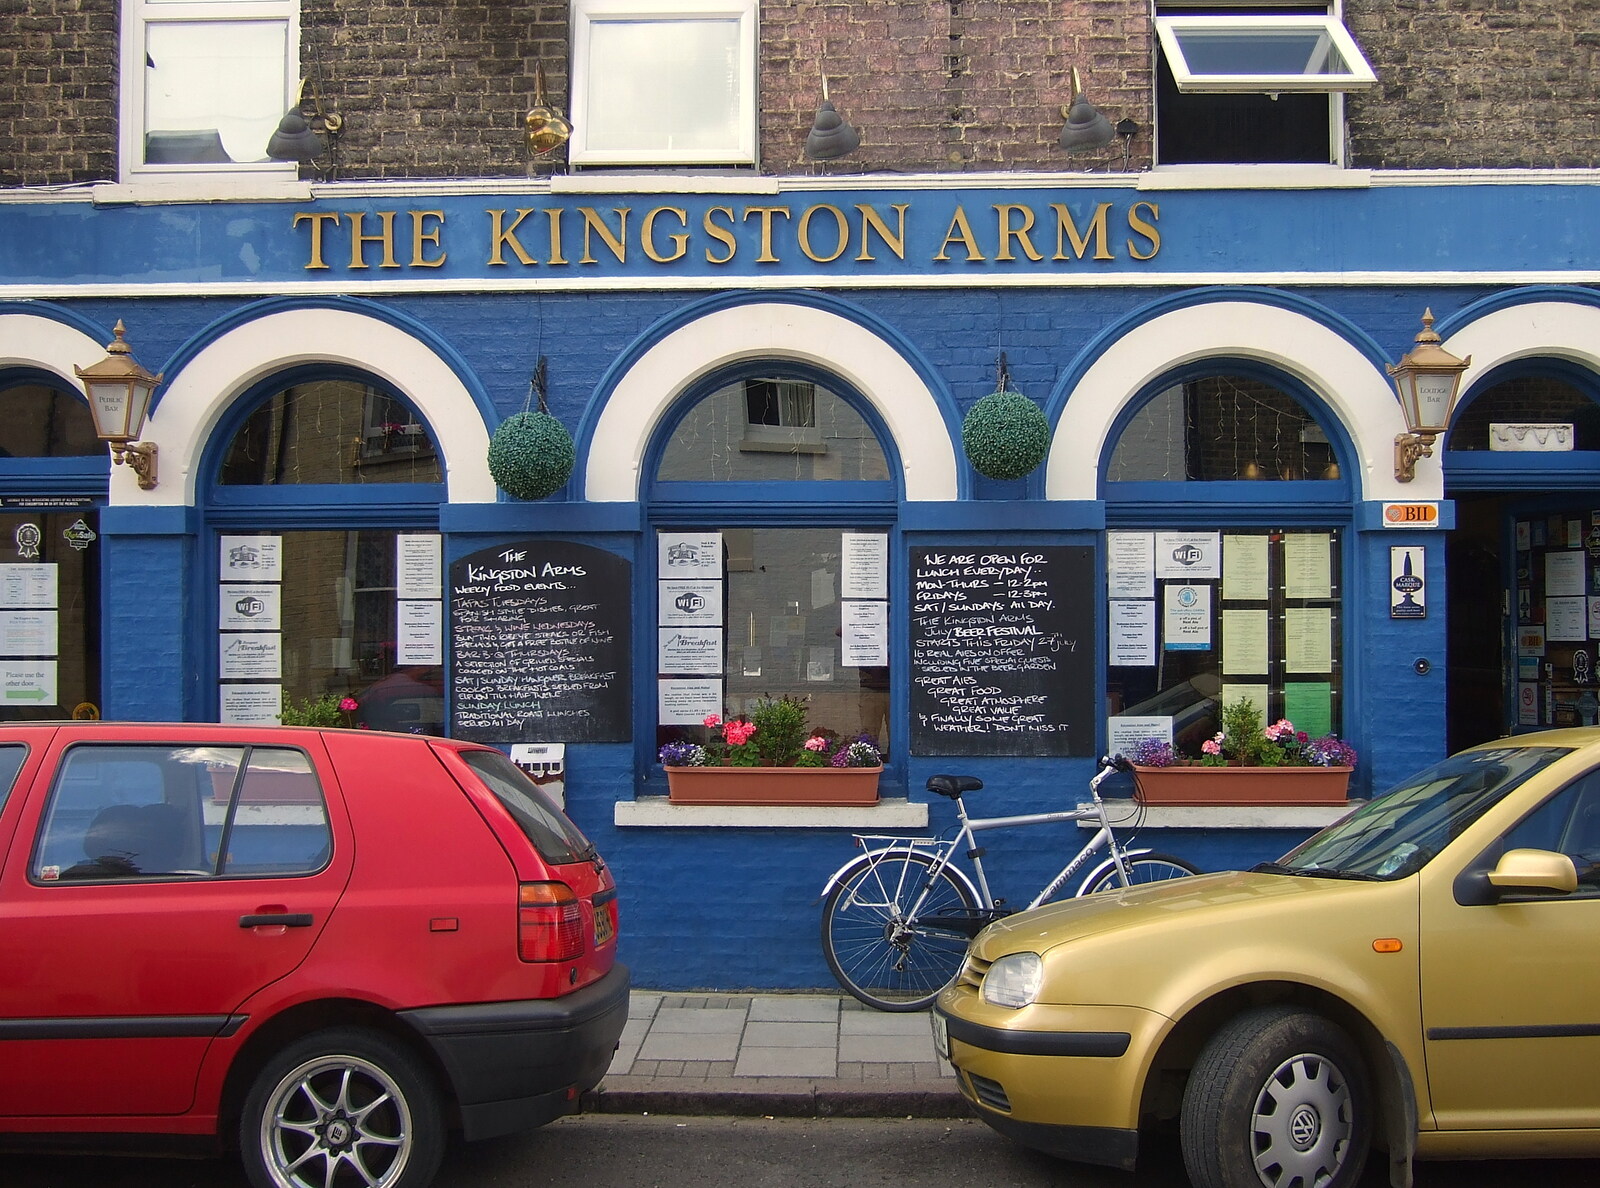 The front of the Kingston Arms from The Cambridge Folk Festival, Cherry Hinton, Cambridge - 28th July 2012